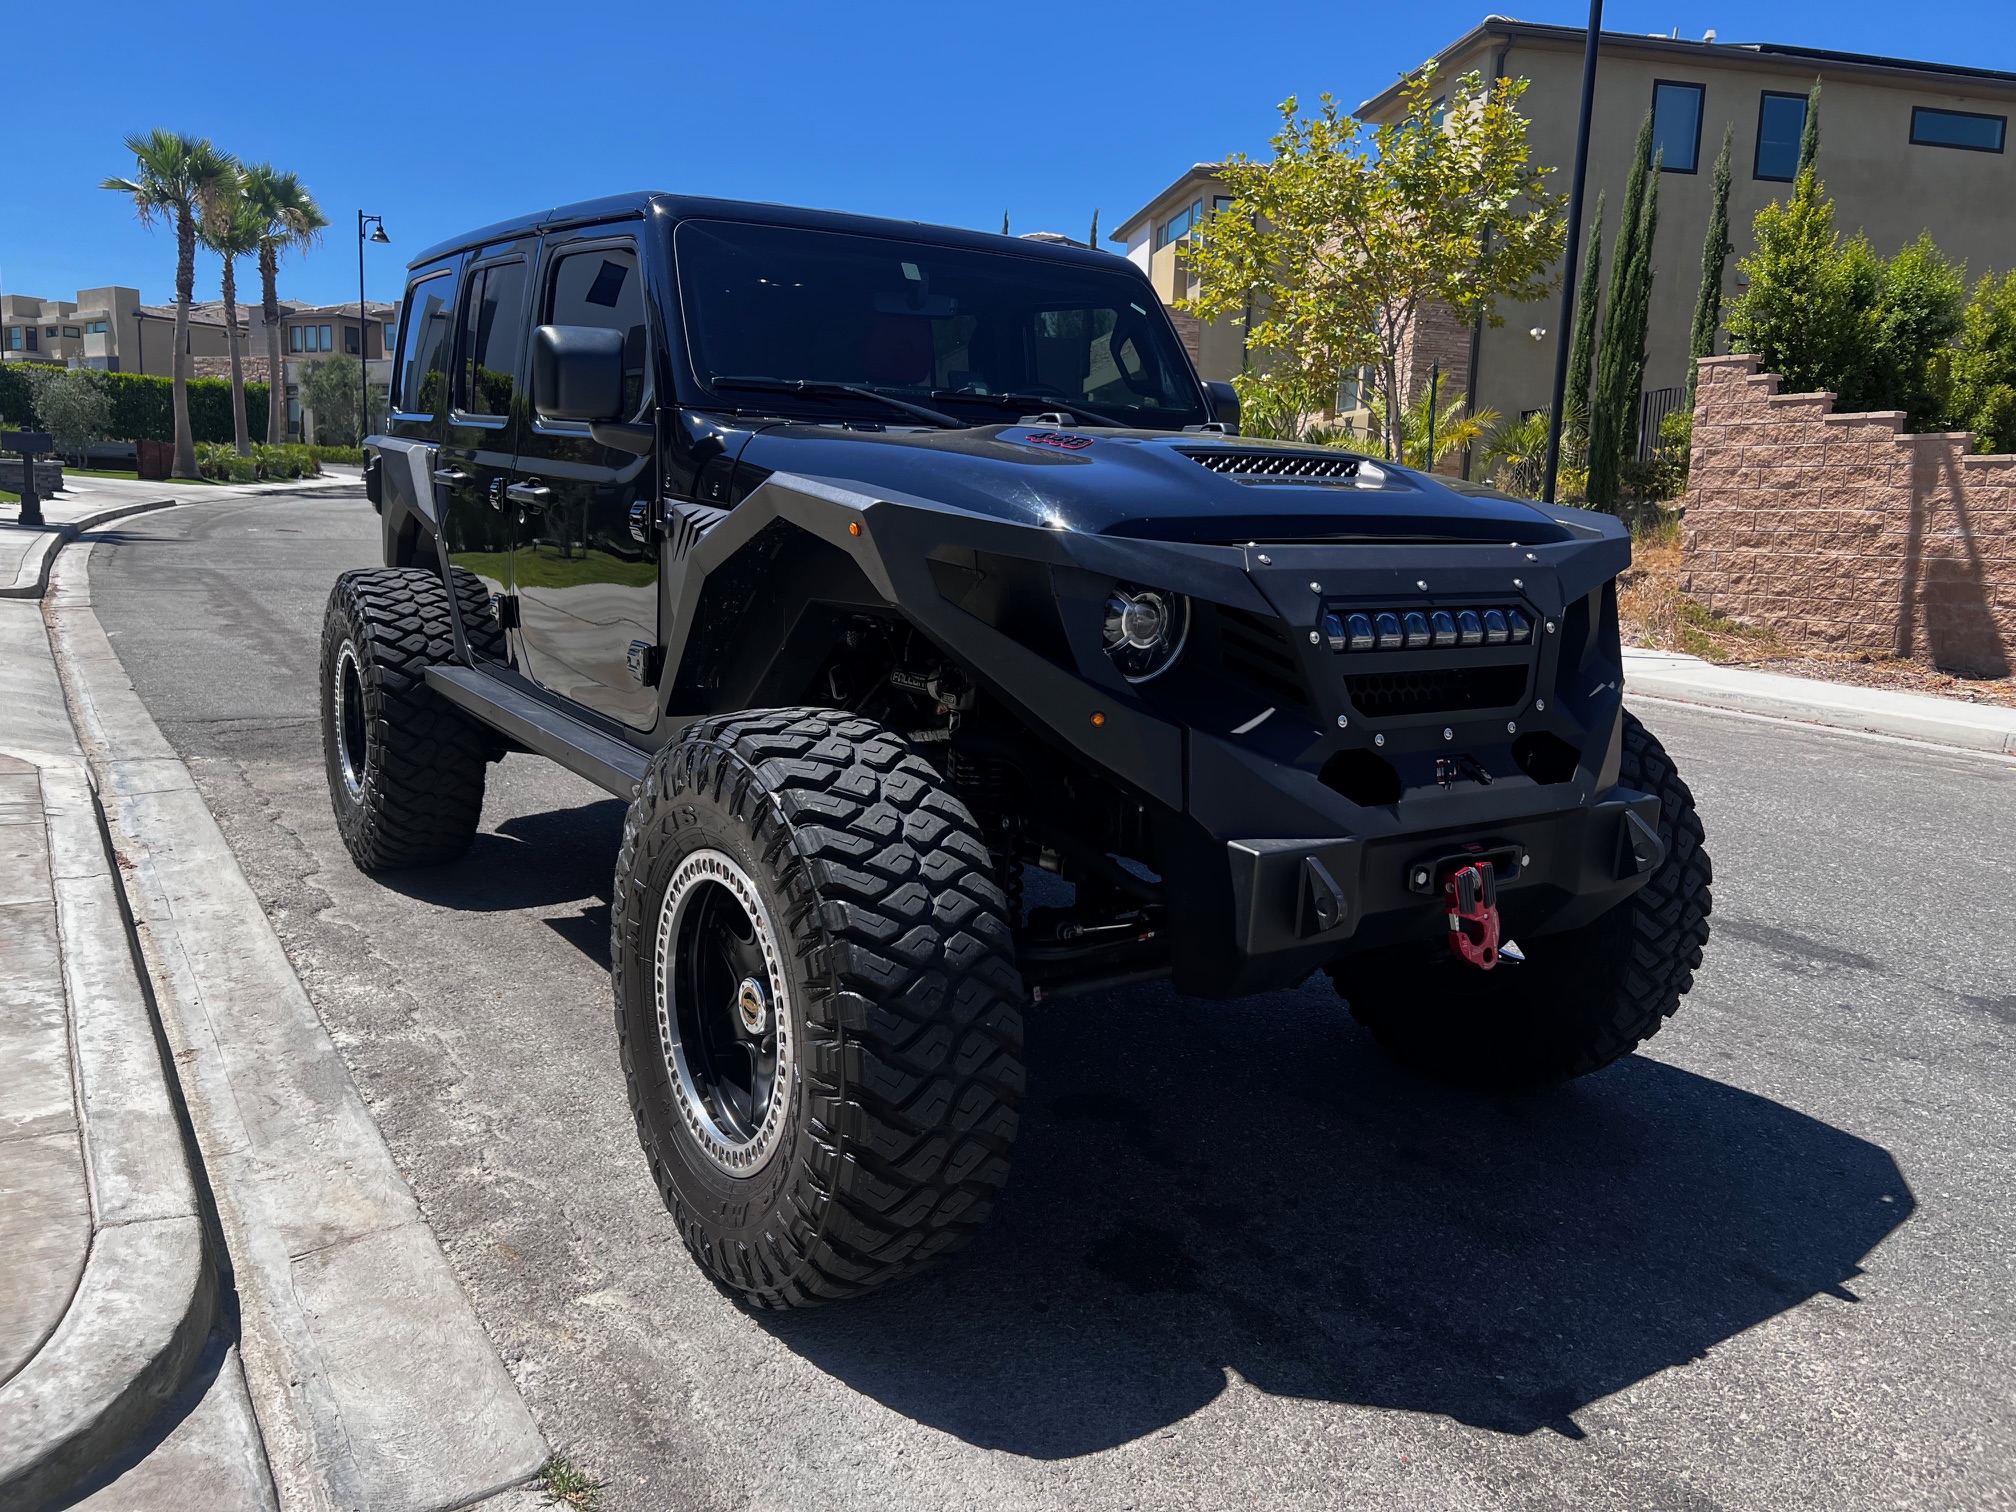 Used 2021 Jeep Wrangler for Sale Right Now - Autotrader